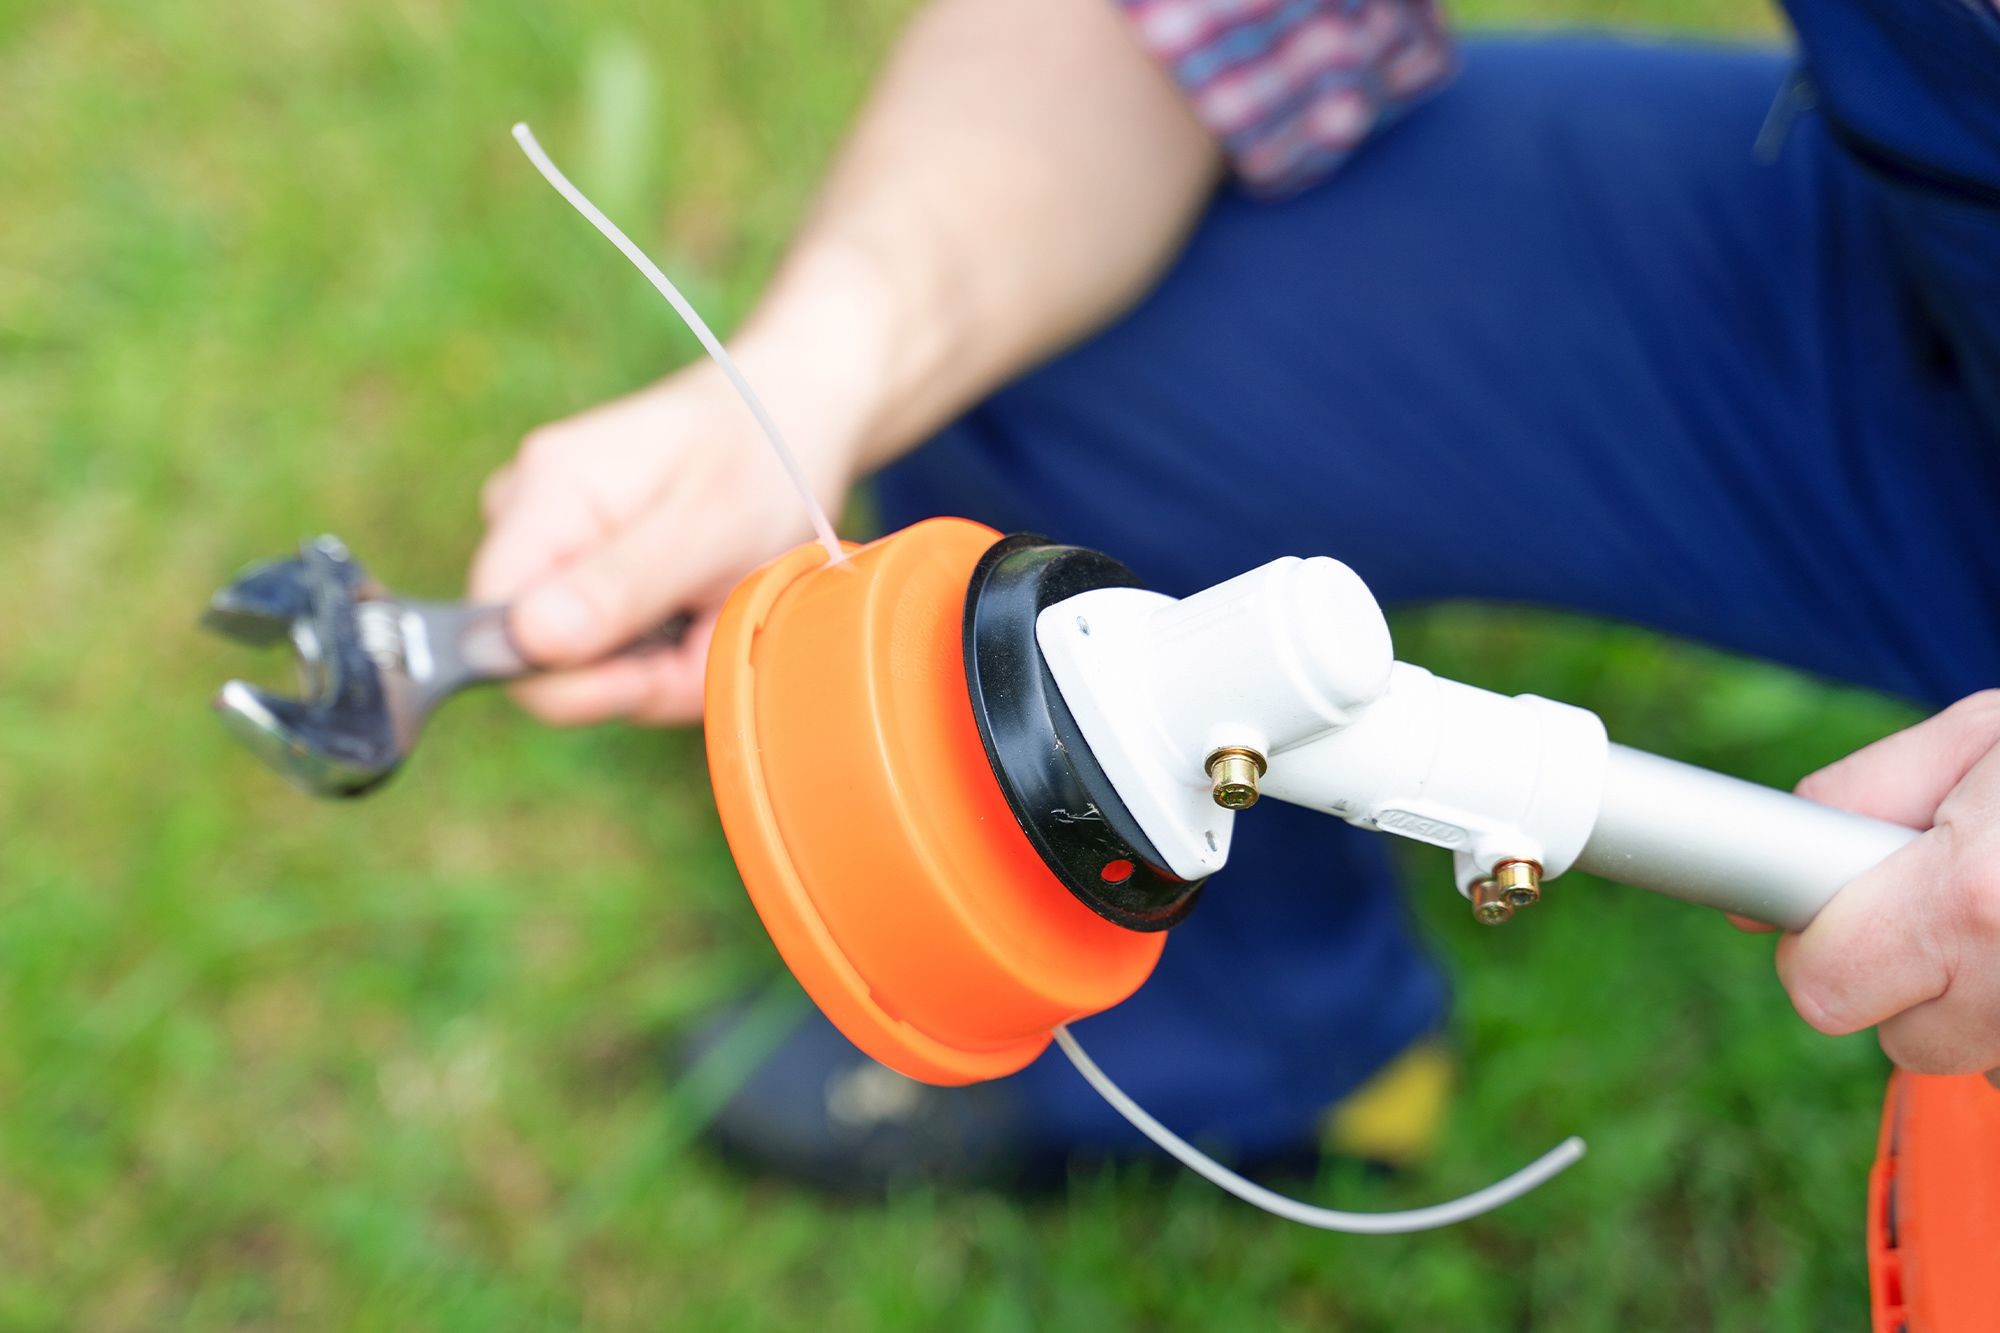 How To Put String In A Weed Eater